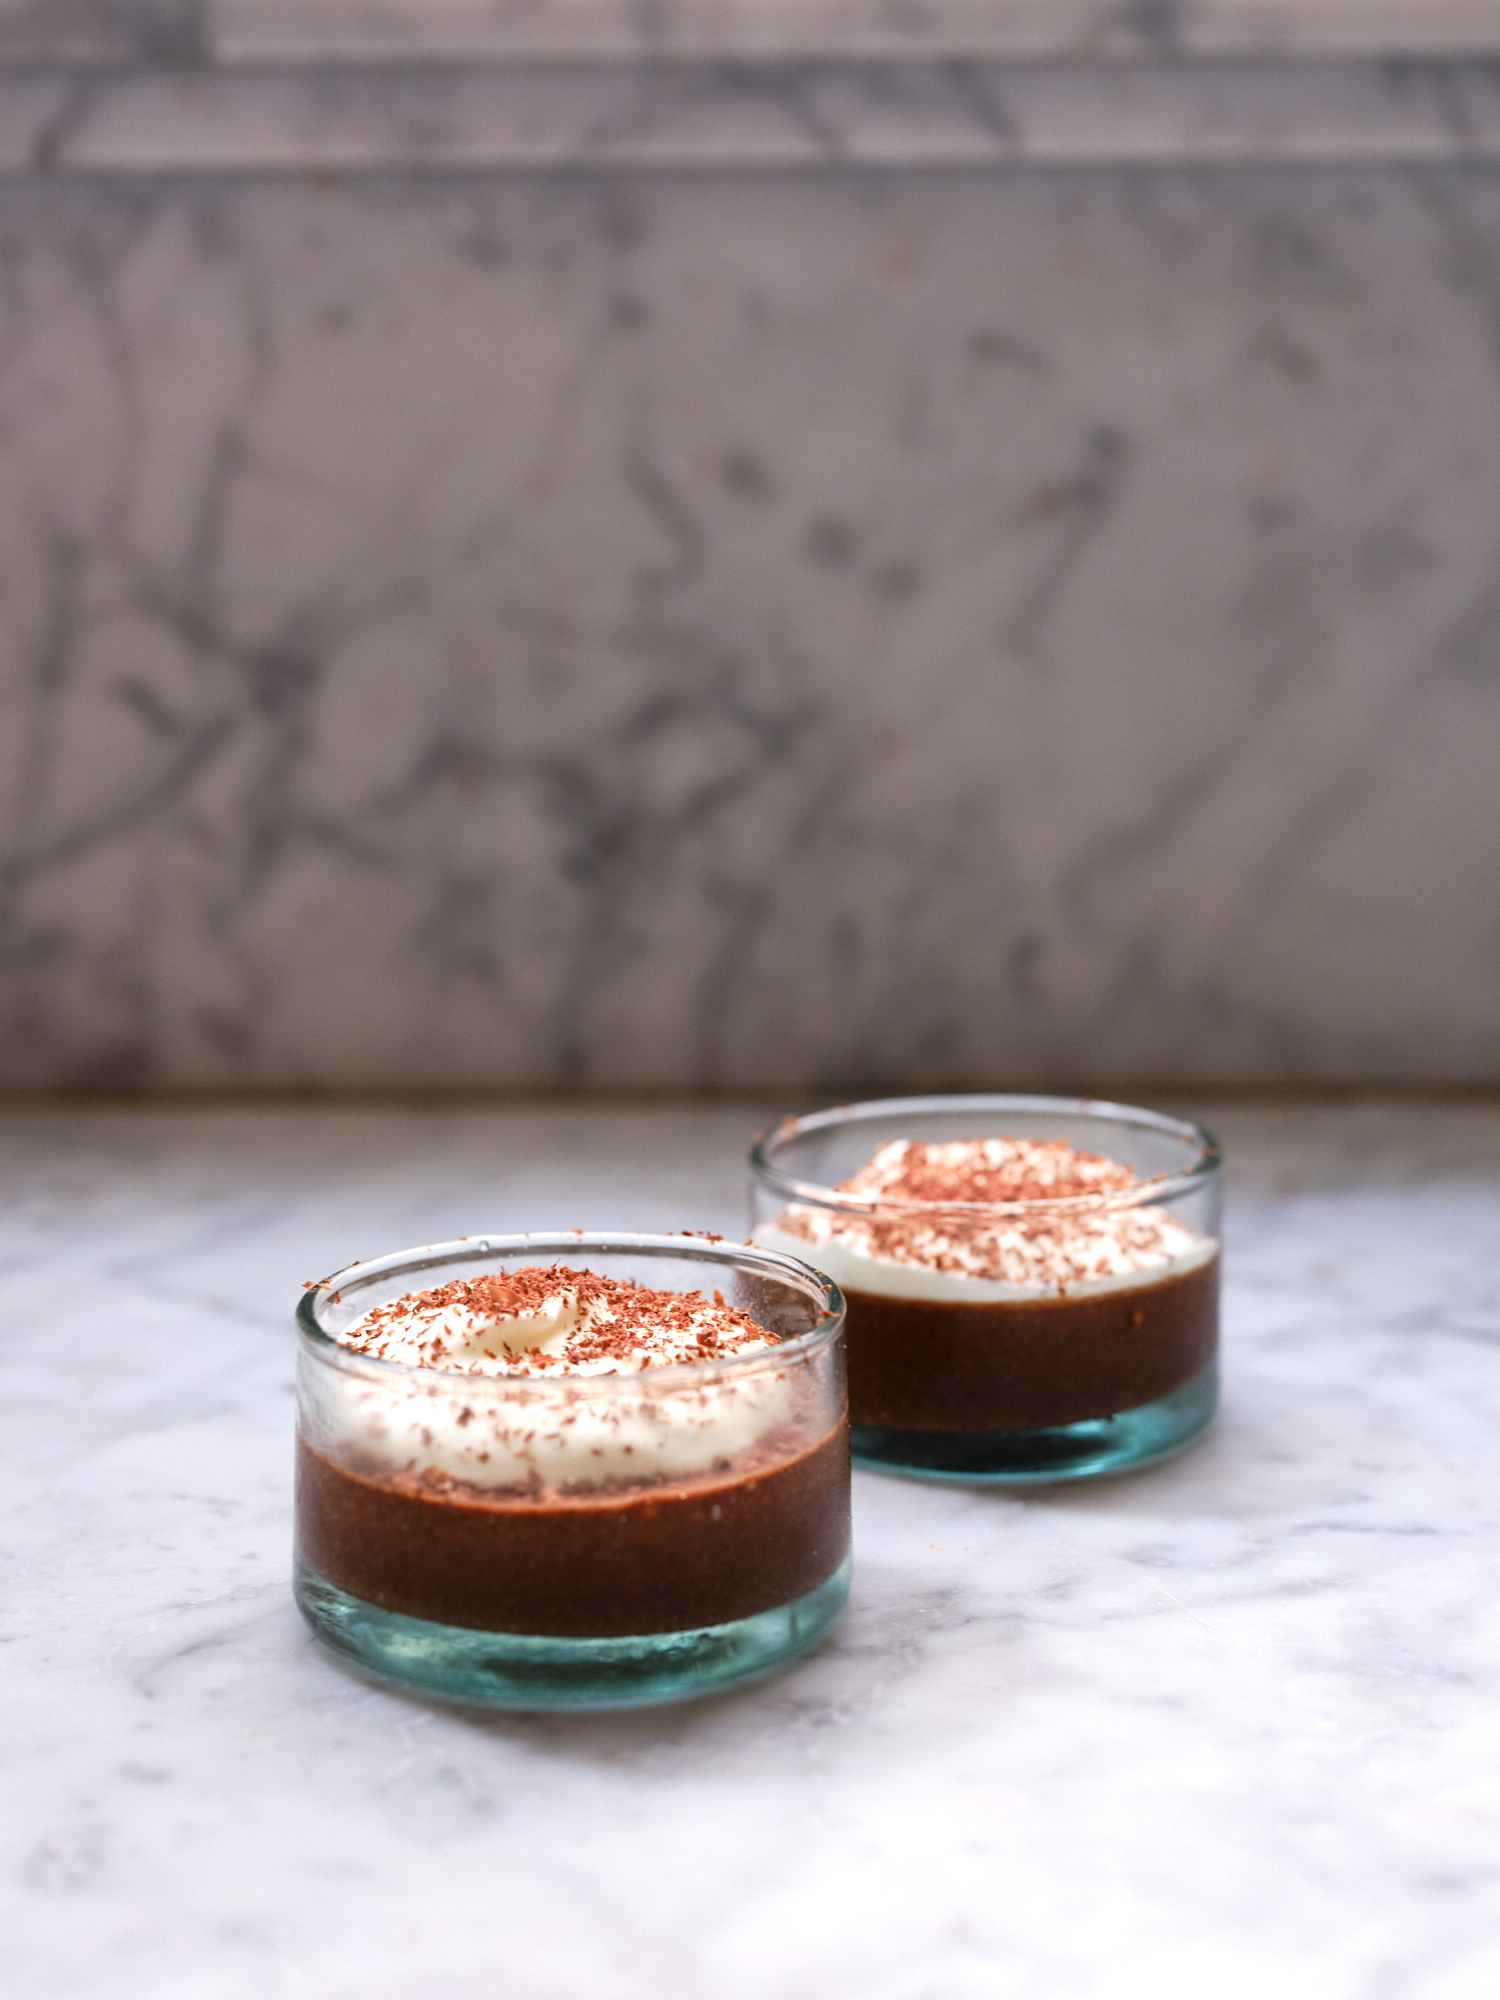 Smoked Chocolate Mousse in a Small Glass From the Side